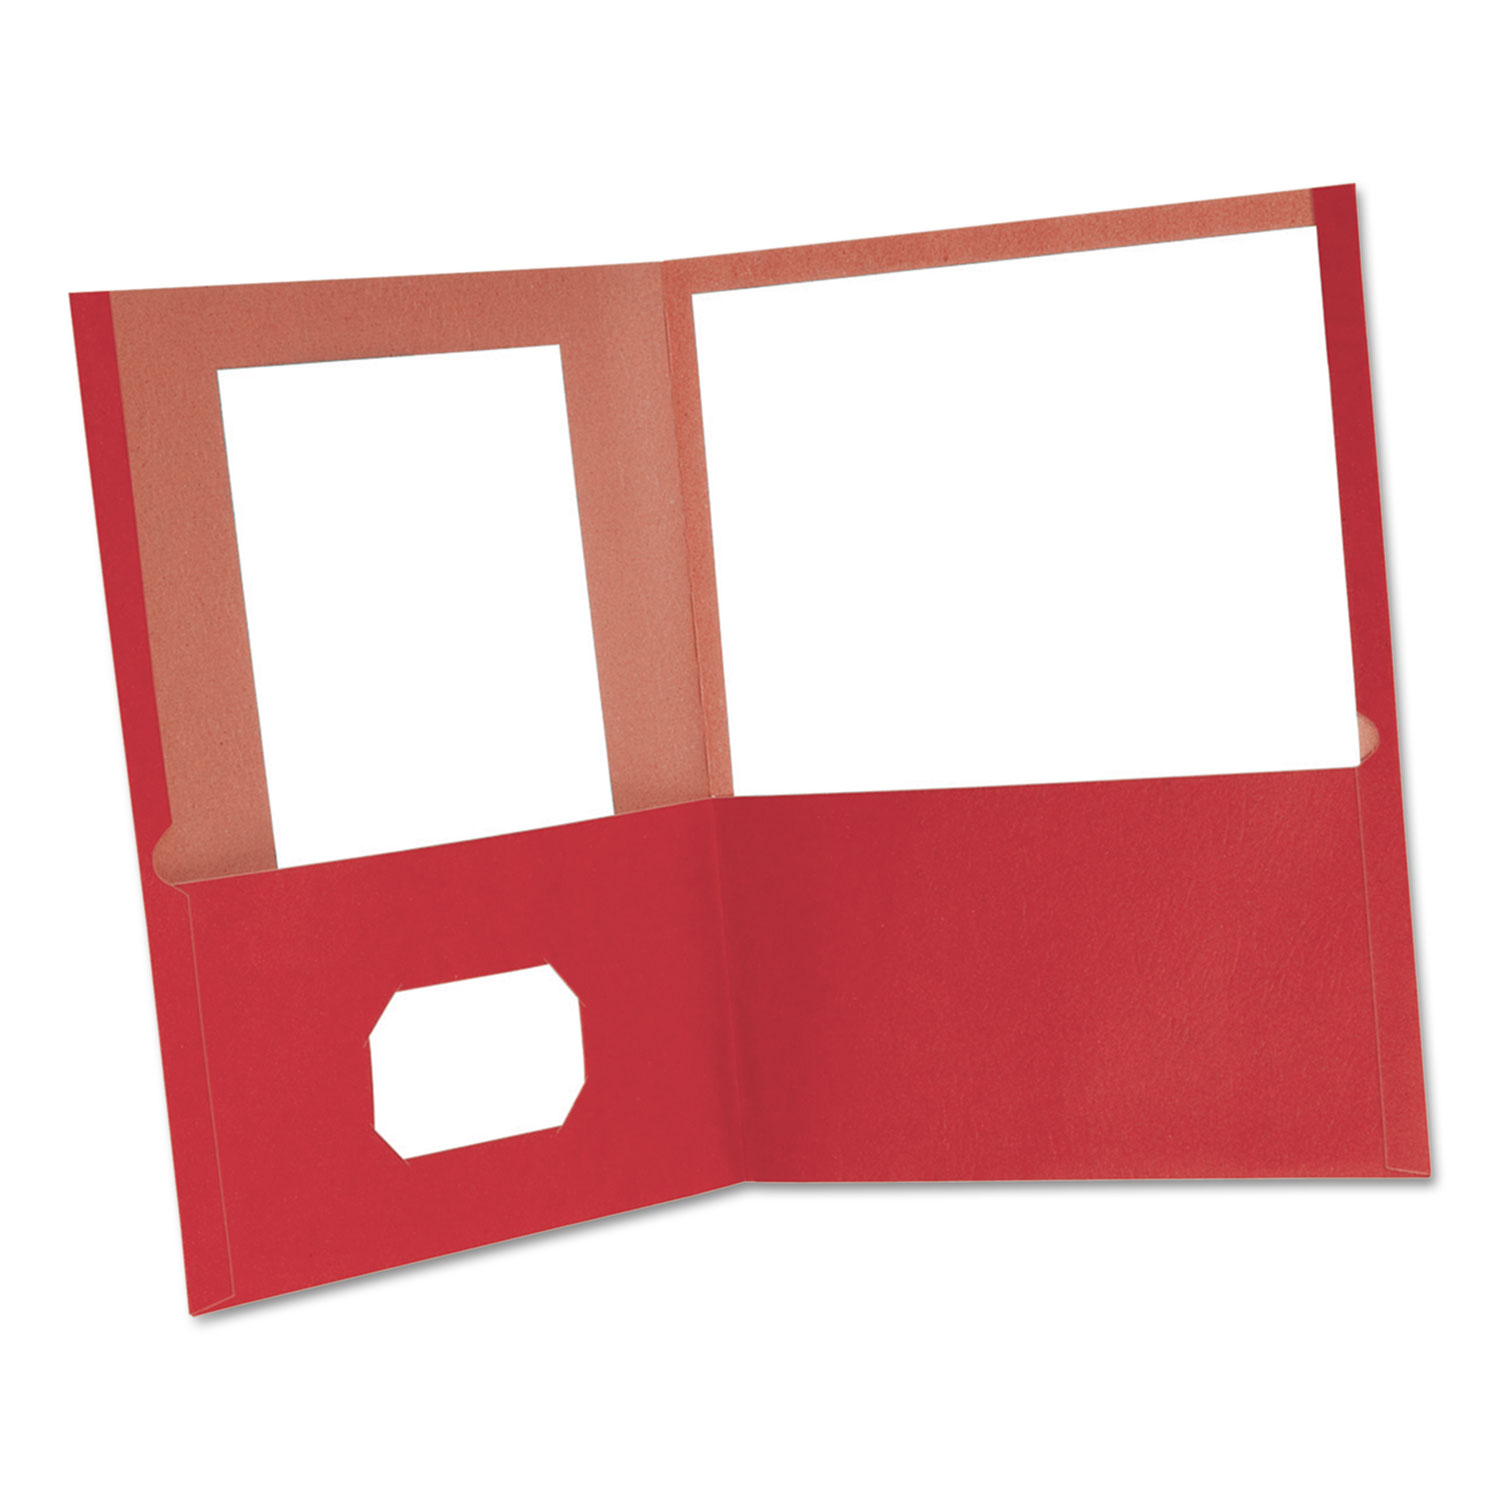 Earthwise by Oxford 100% Recycled Paper Twin-Pocket Portfolio, Red